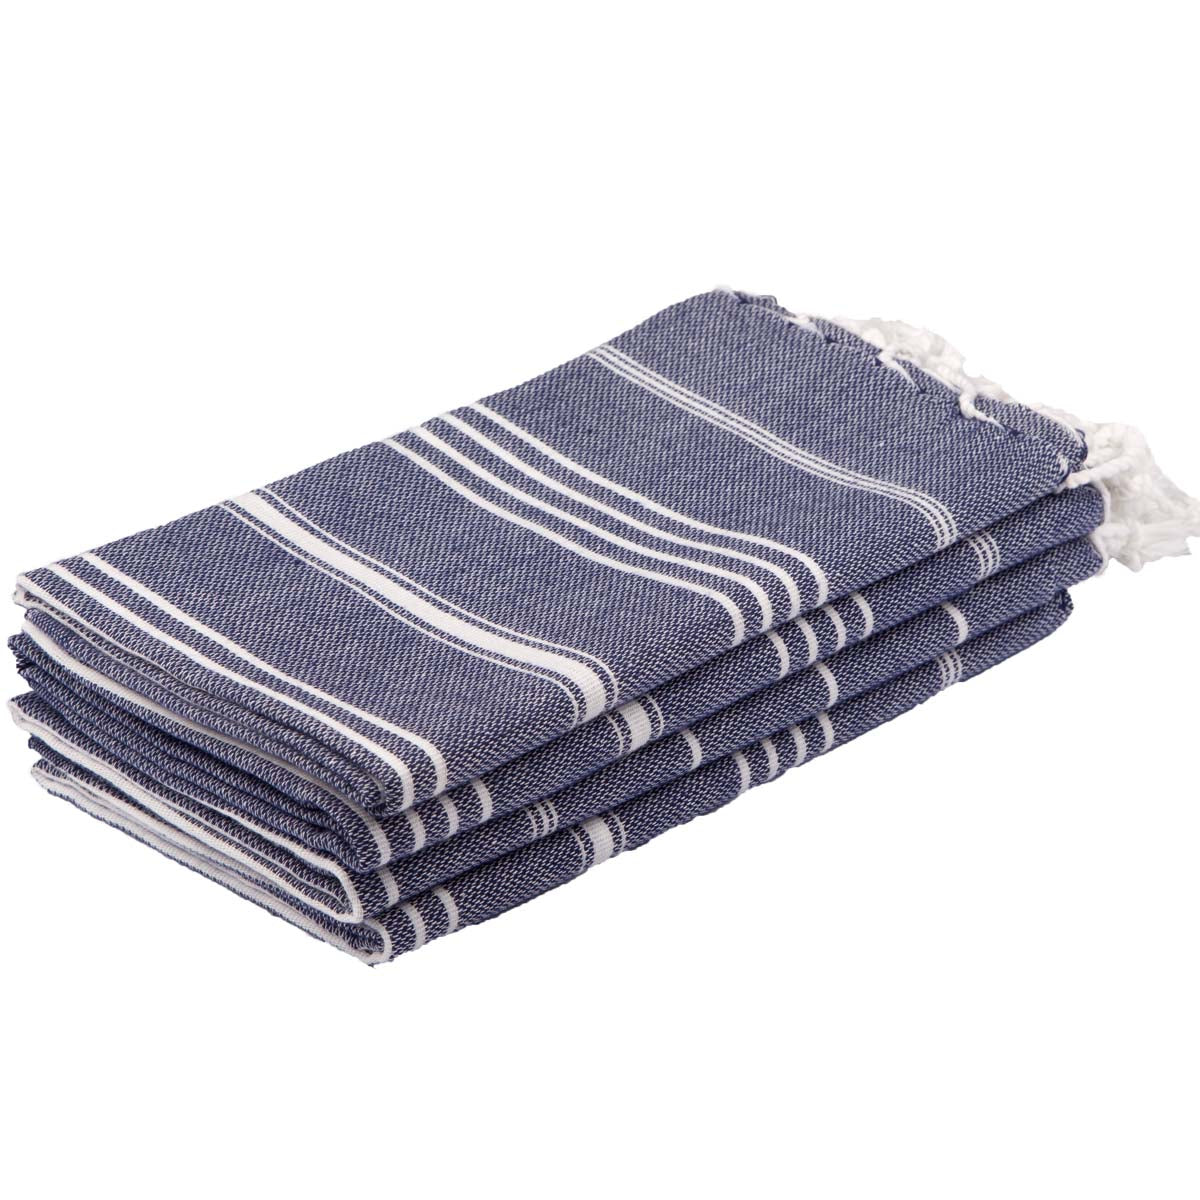 Turkish Hand Towels for Bathroom Set of 4 - 20 x 40 inches